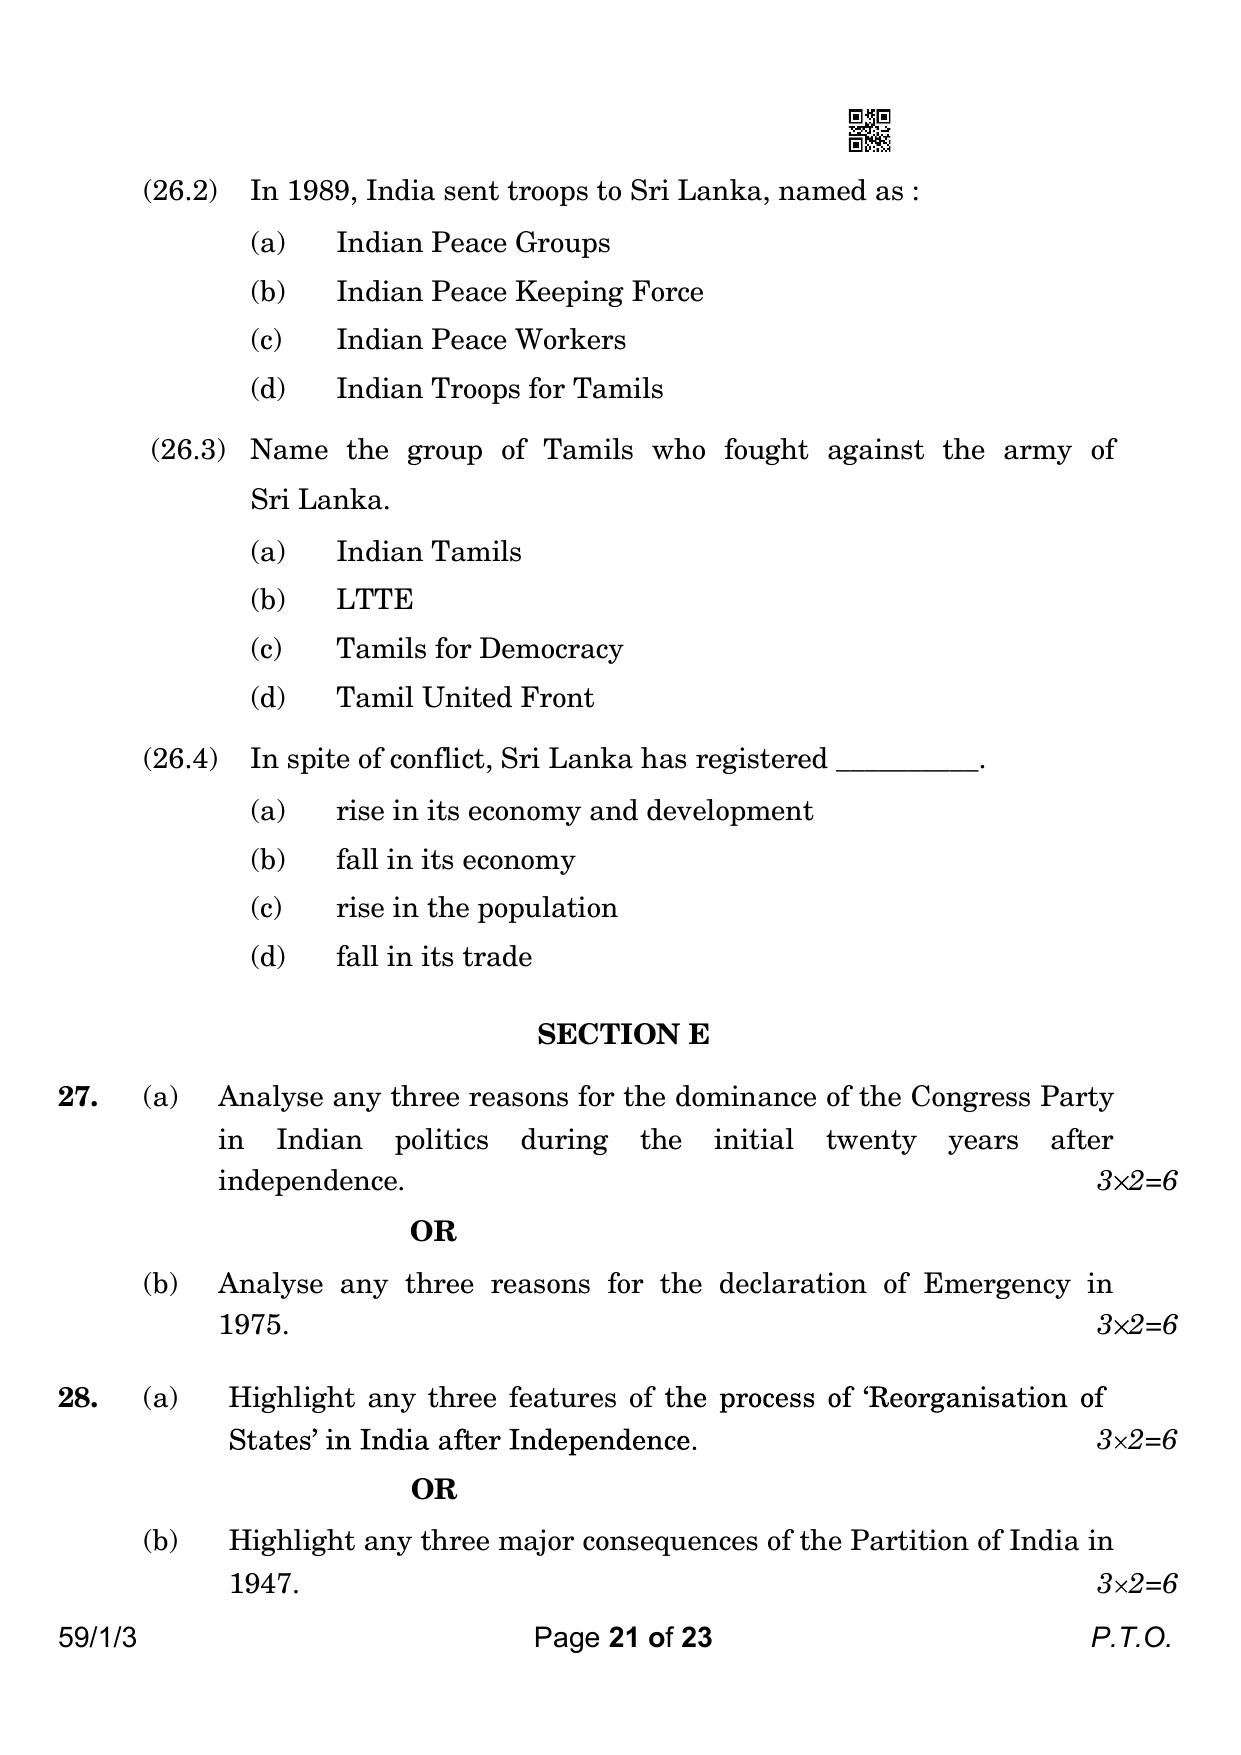 CBSE Class 12 59-1-3 Political Science 2023 Question Paper - Page 21